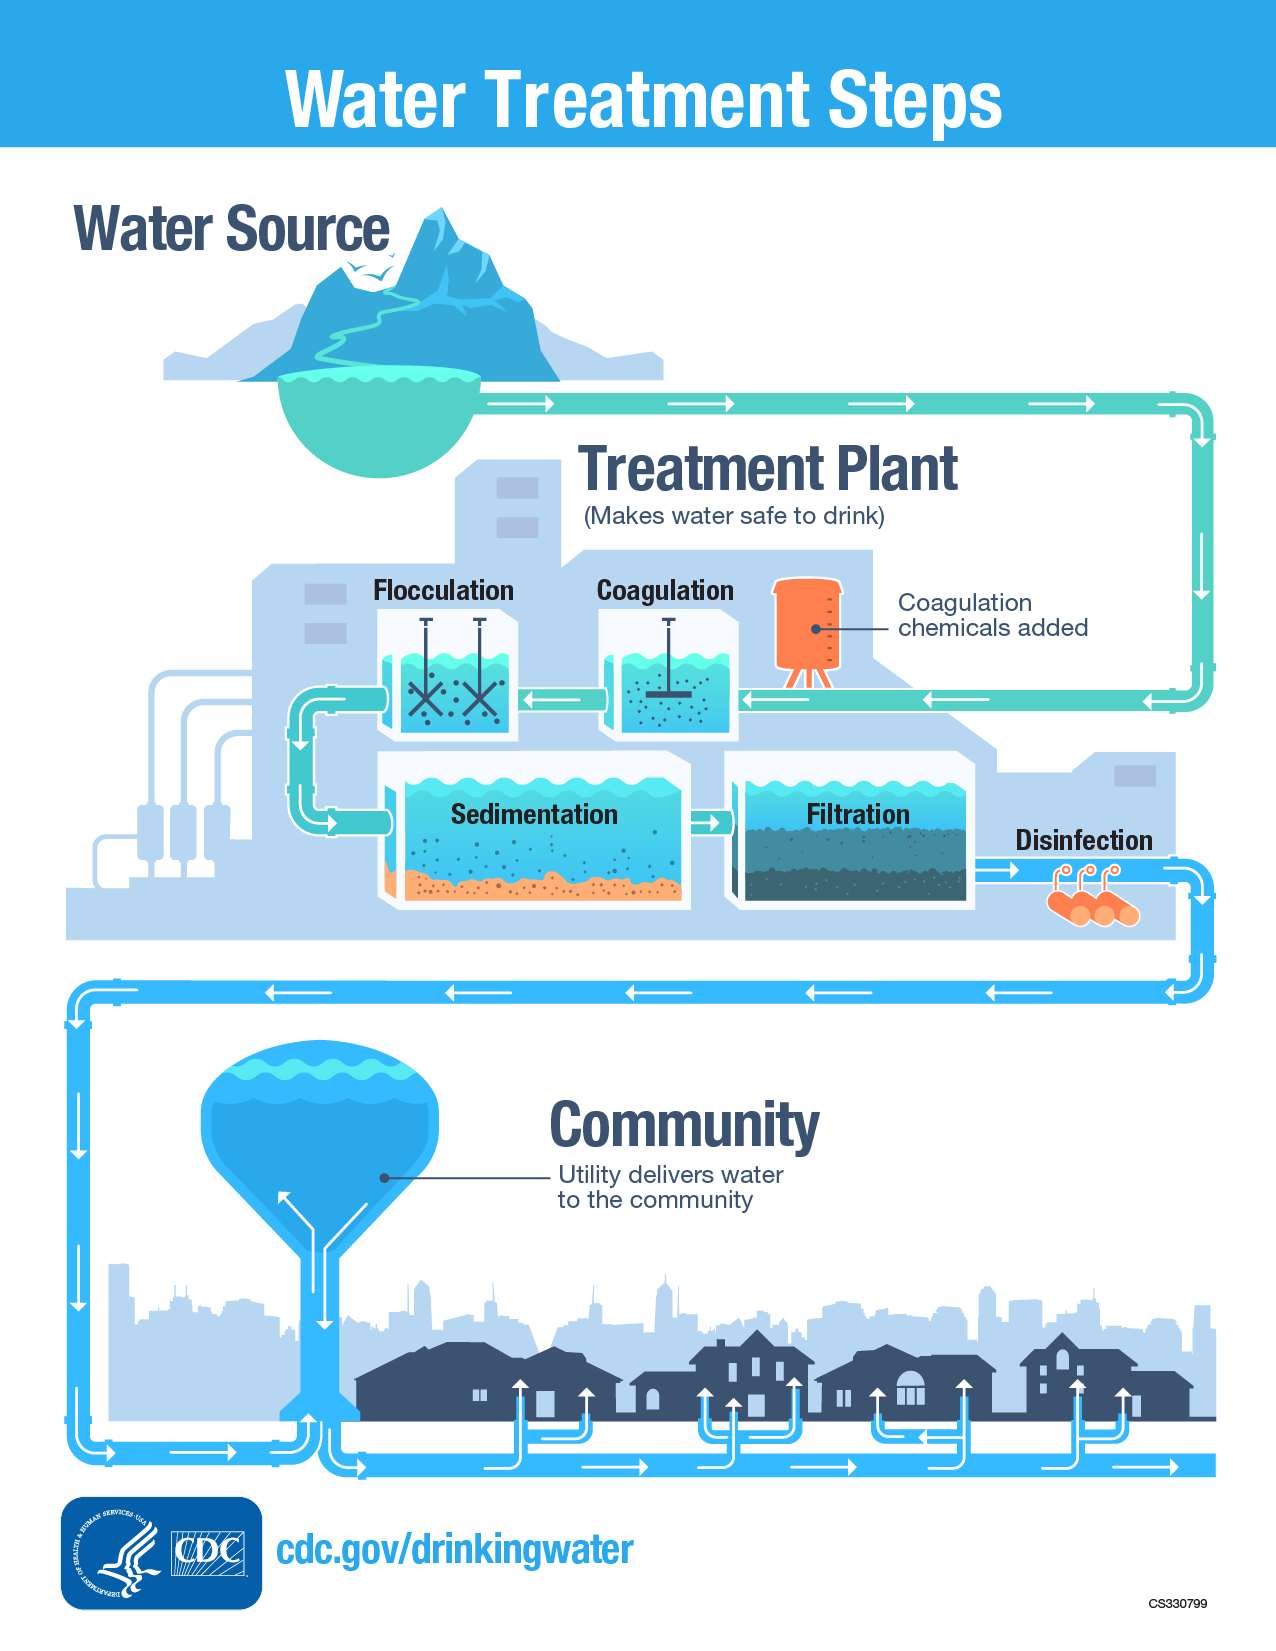 What Does a Water Treatment Plant Do?